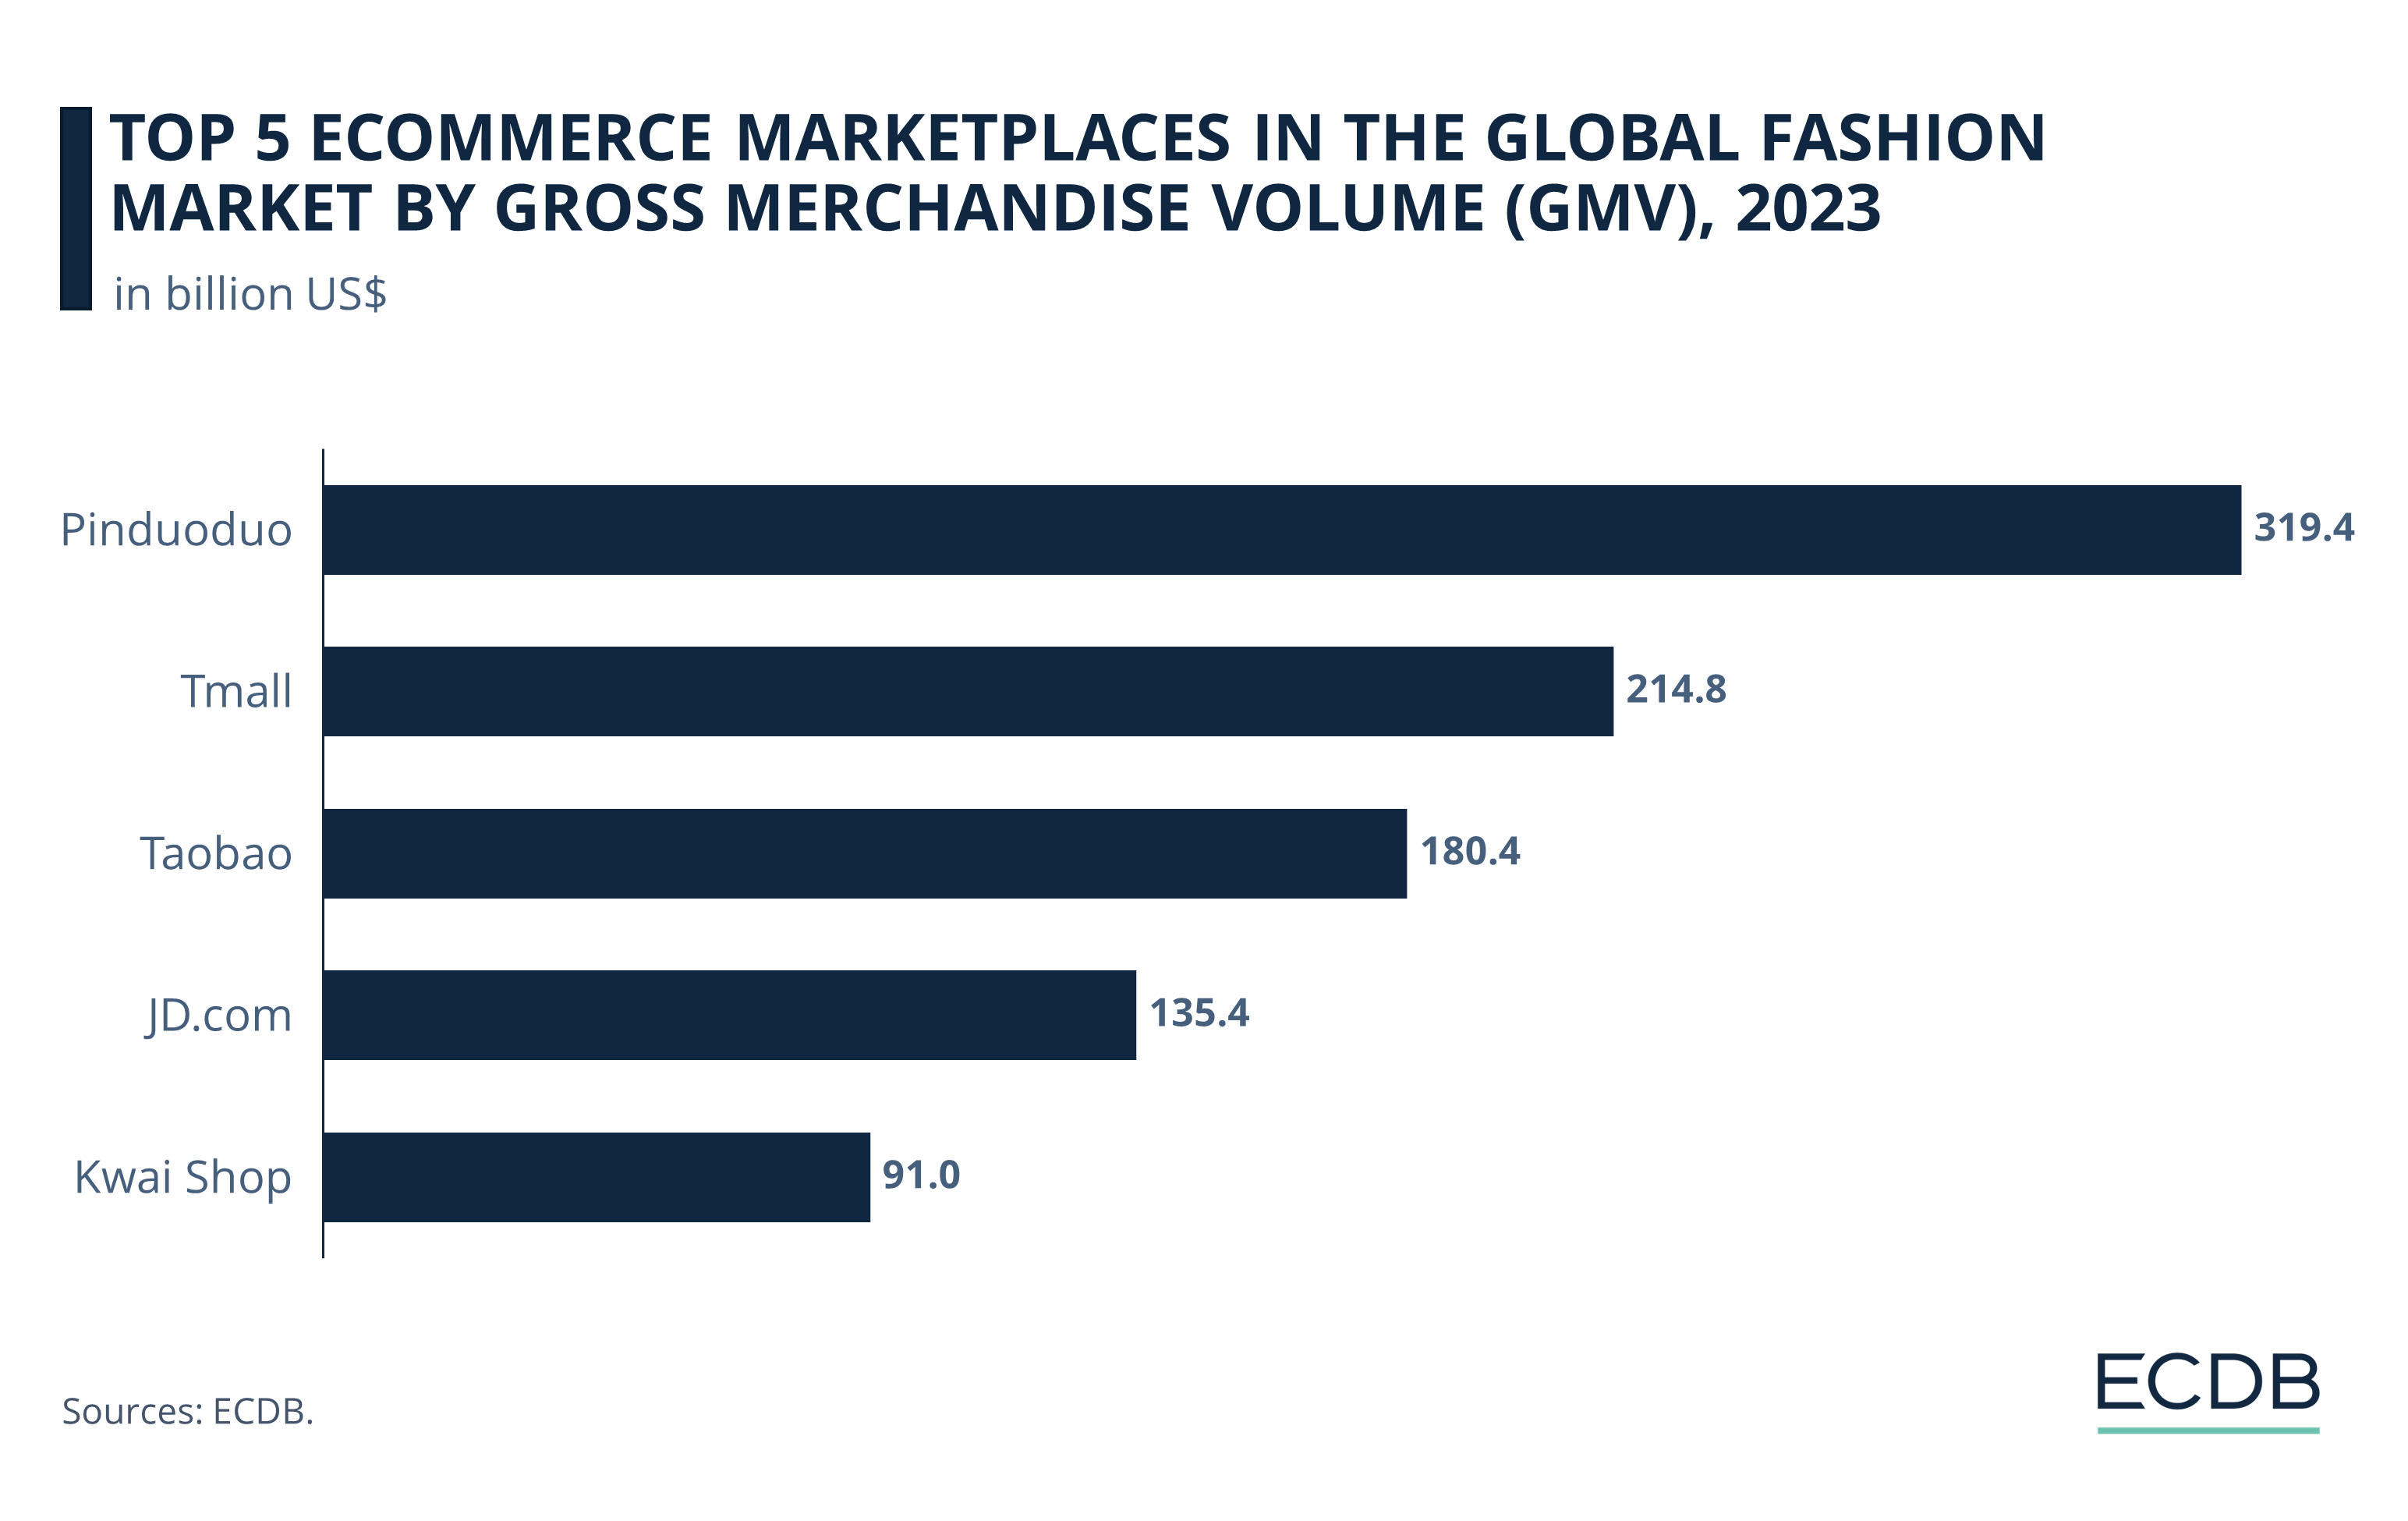 Top 5 Fashion eCommerce Marketplaces in the Global Fashion Market by GMV, 2023